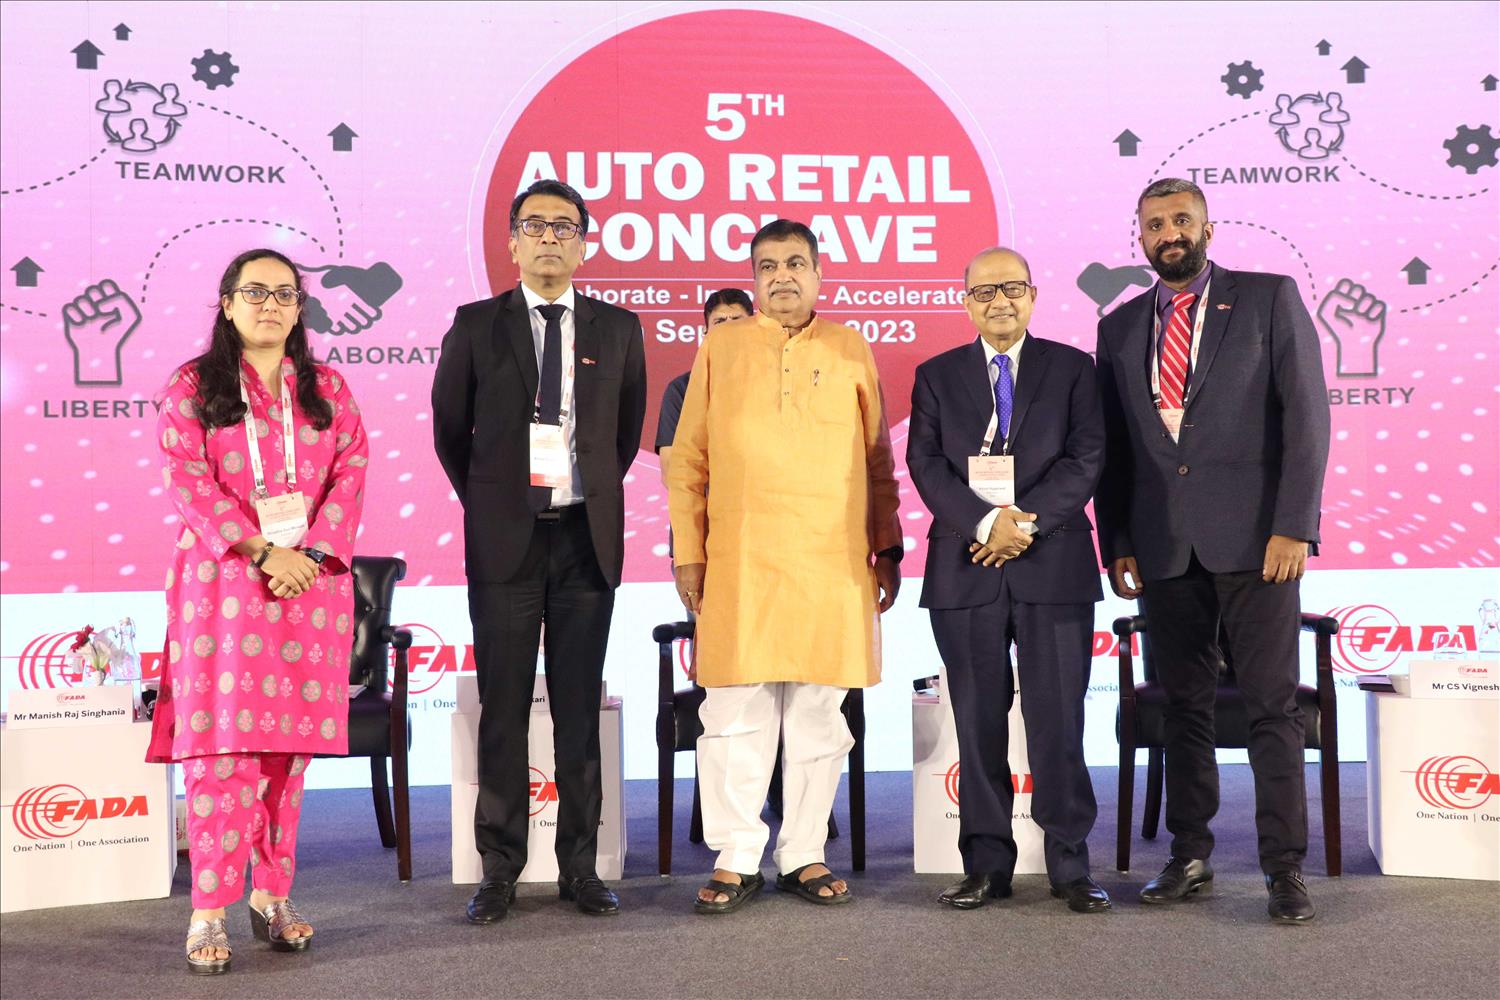 Federation Of Automobile Dealers Associations (Fada) Concludes 5Th Auto Retail Conclave - 'Collaborate-Innovate-Accelerate'